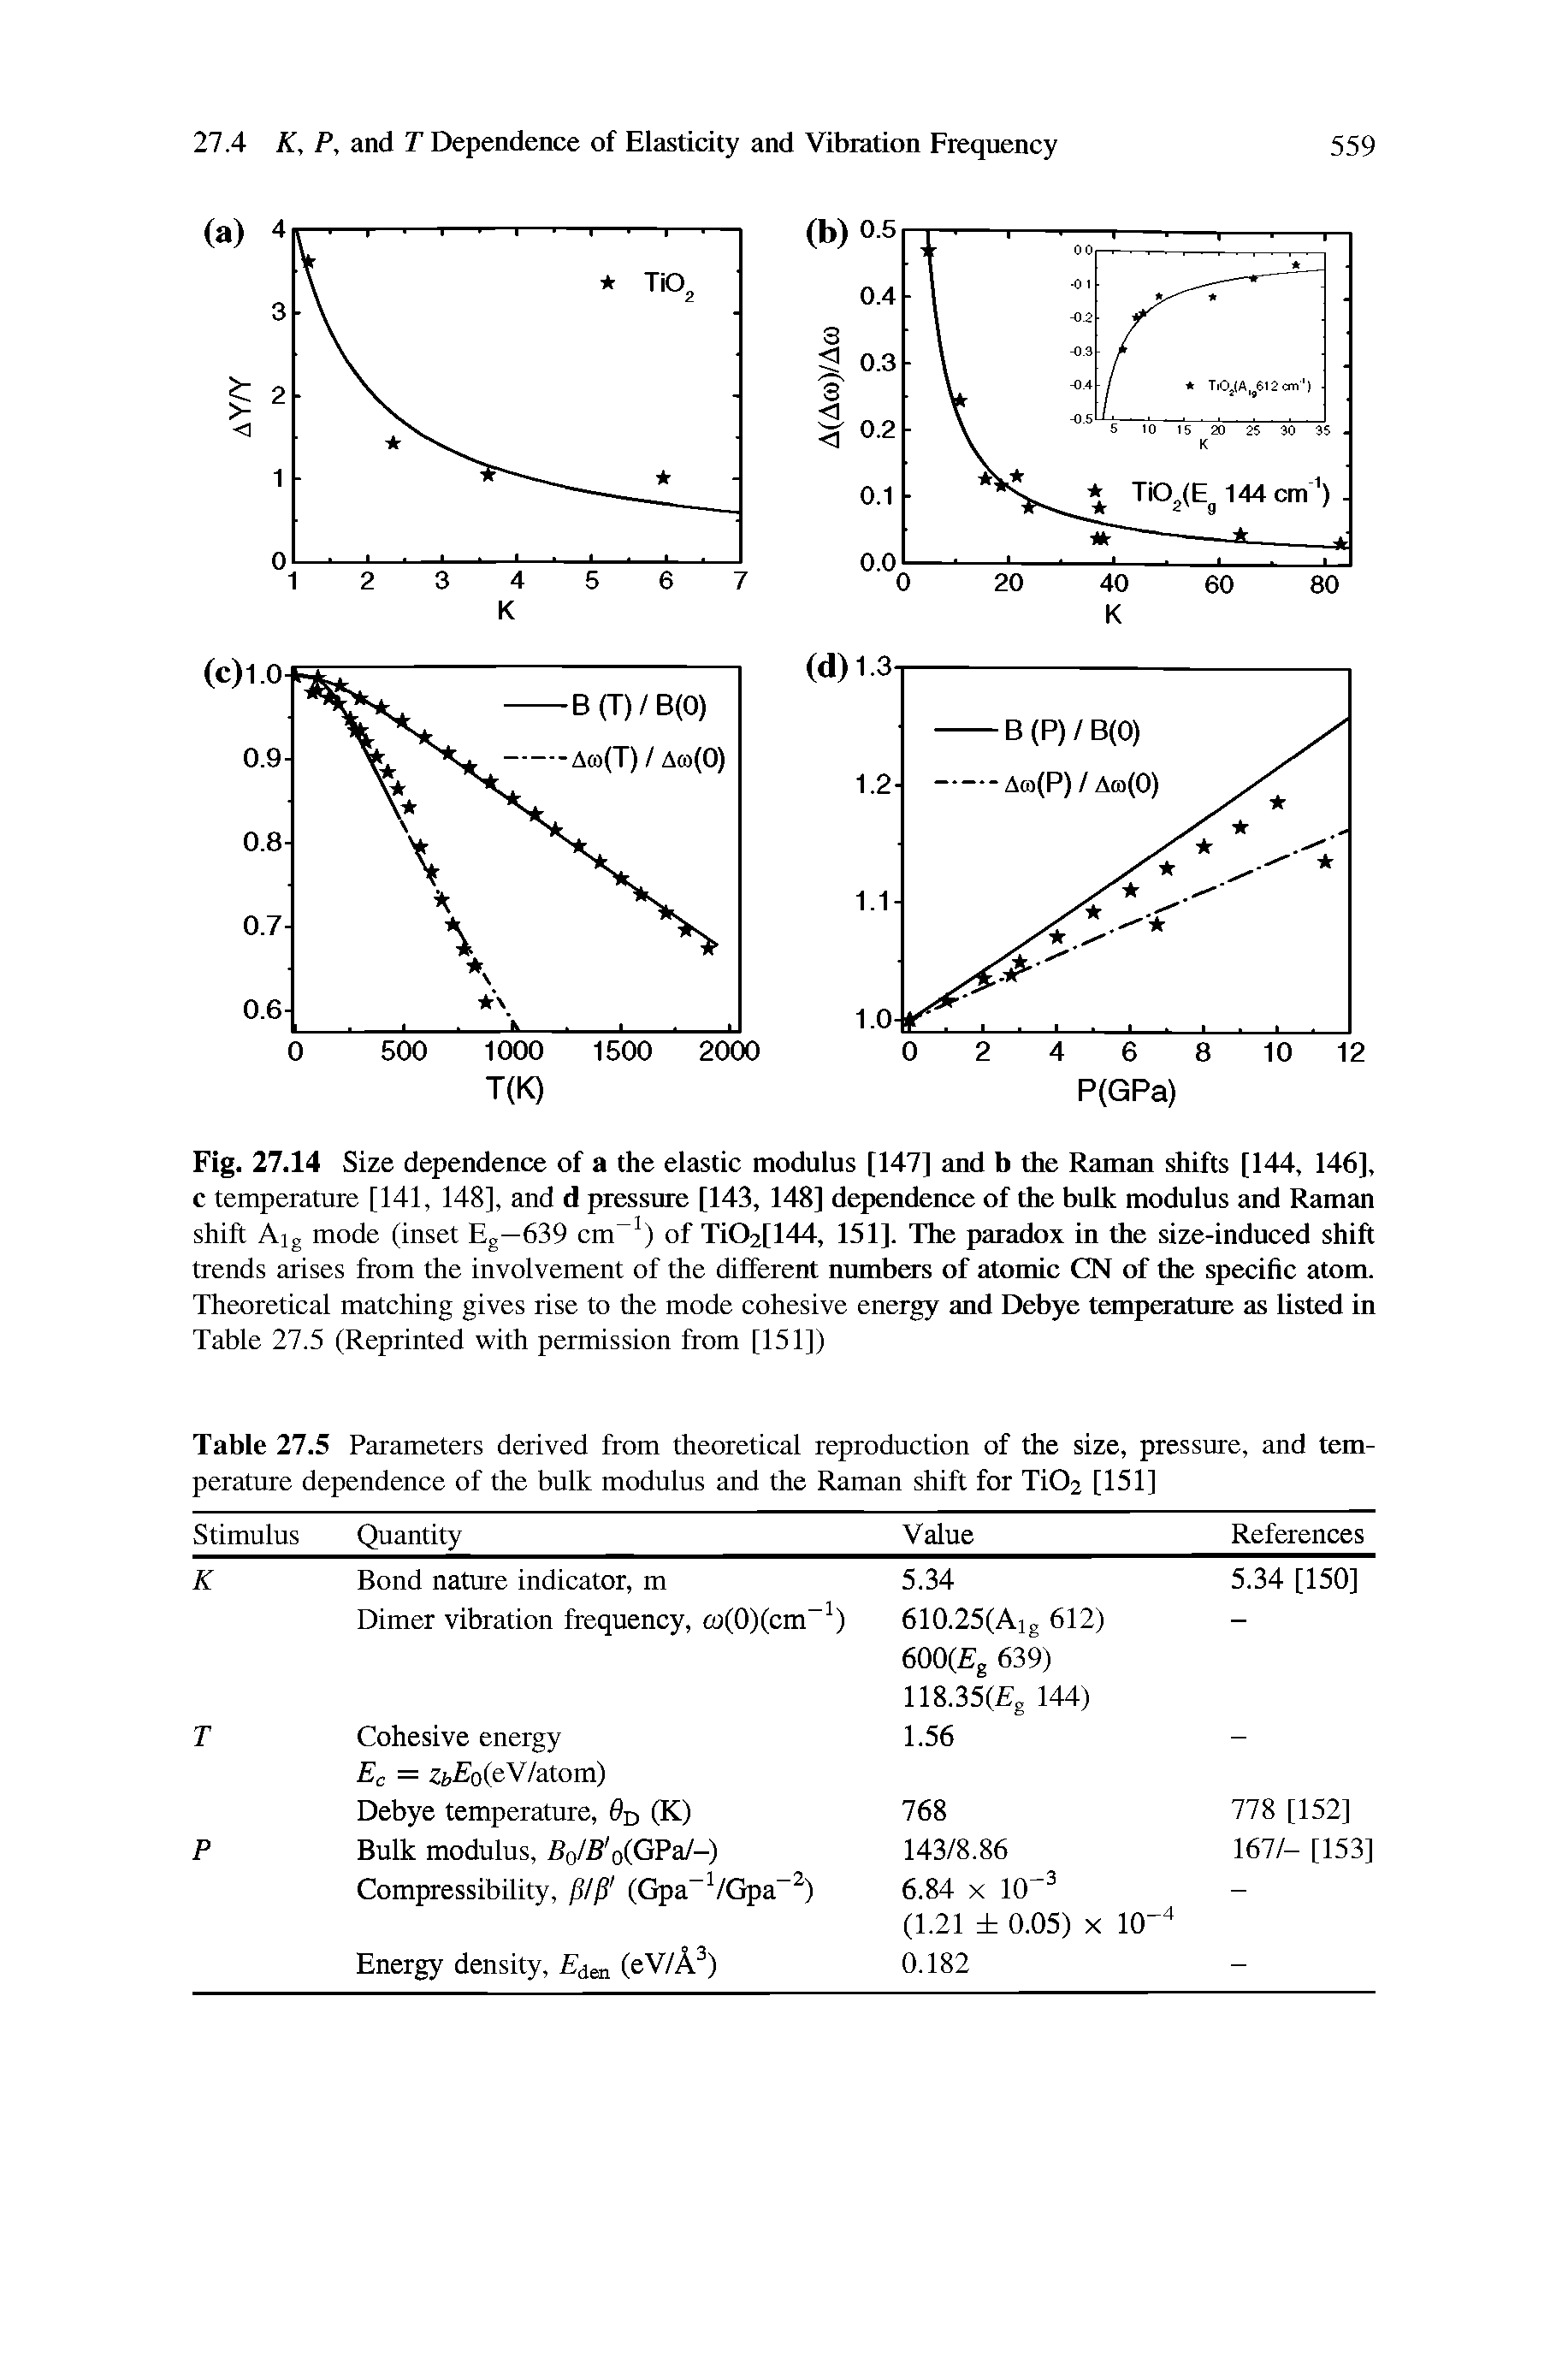 Fig. 27.14 Size dependence of a the elastic modulus [147] and b the Raman shifts [144, 146], c temperature [141, 148], and d pressure [143, 148] dependence of the bulk modulus and Raman shift Aig mode (inset Eg—639 cm ) of Ti02[144, 151]. The paradox in the size-induced shift trends arises from the involvement of the different numbers of atomic CN of the specific atom. Theoretical matching gives rise to the mode cohesive energy and Debye temperature as listed in Table 27.5 (Reprinted with permission from [151])...